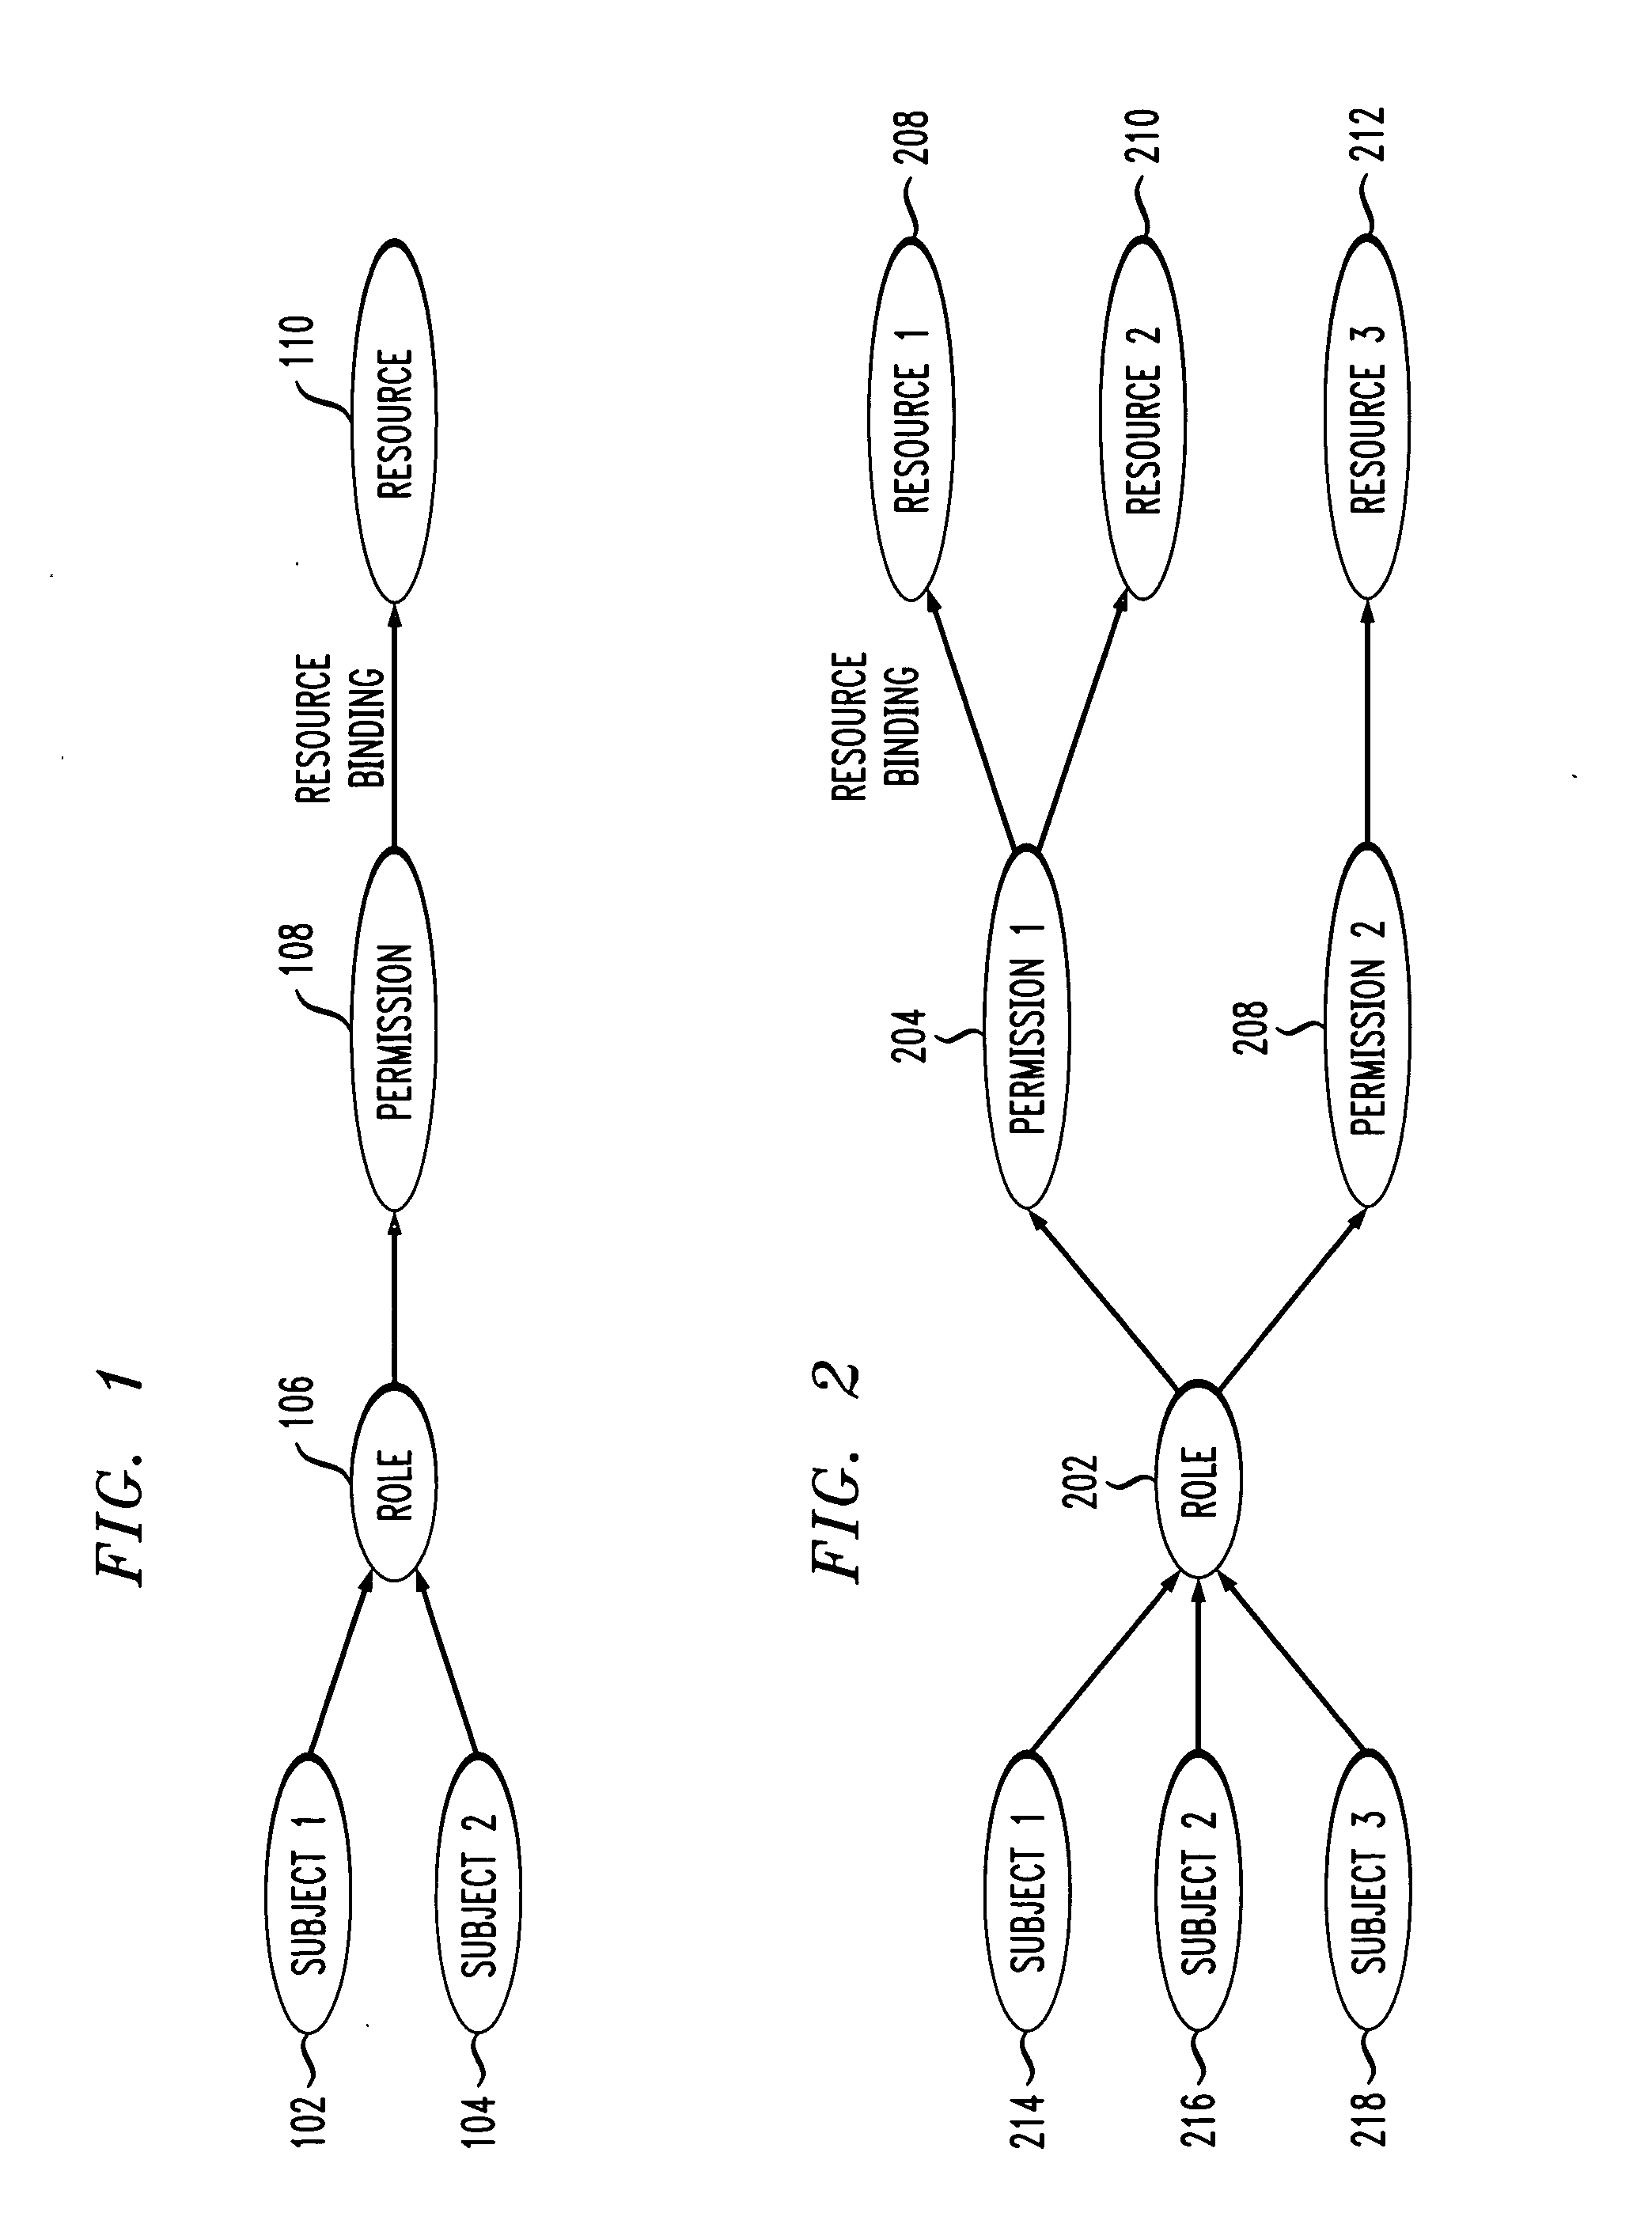 Methods and apparatus for scoped role-based access control